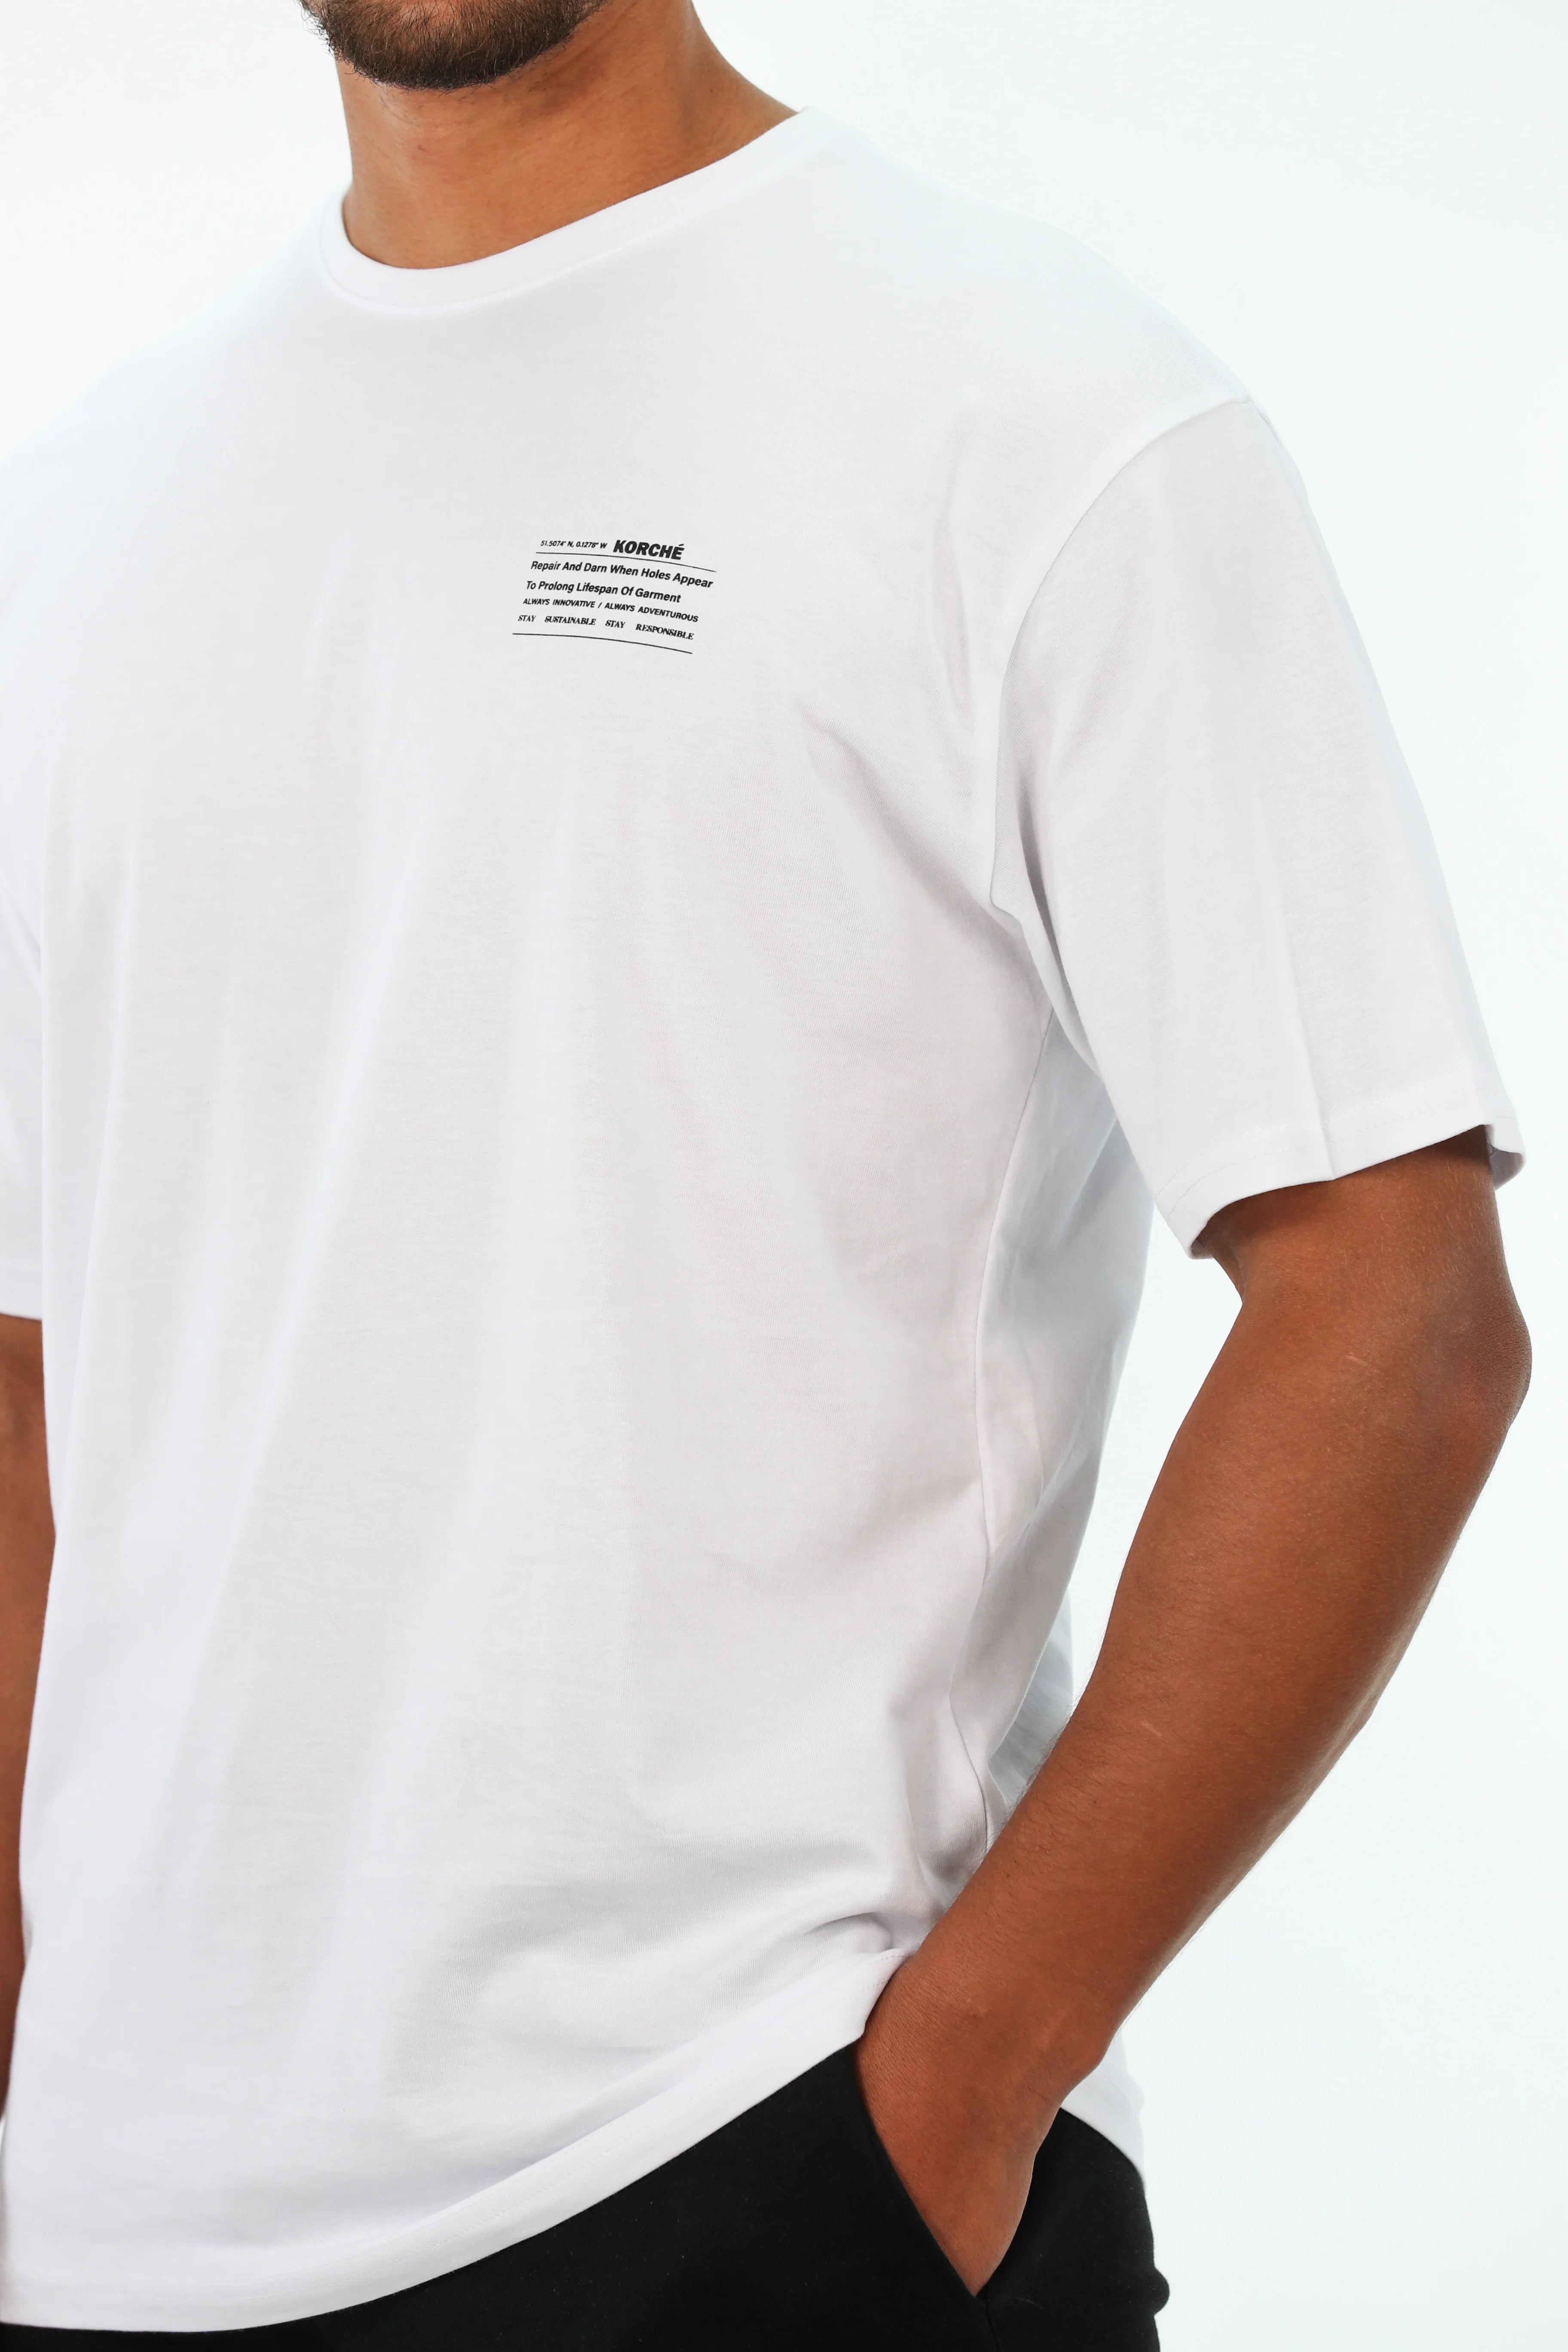 Oversized White T-Shirt With Simple Front Design